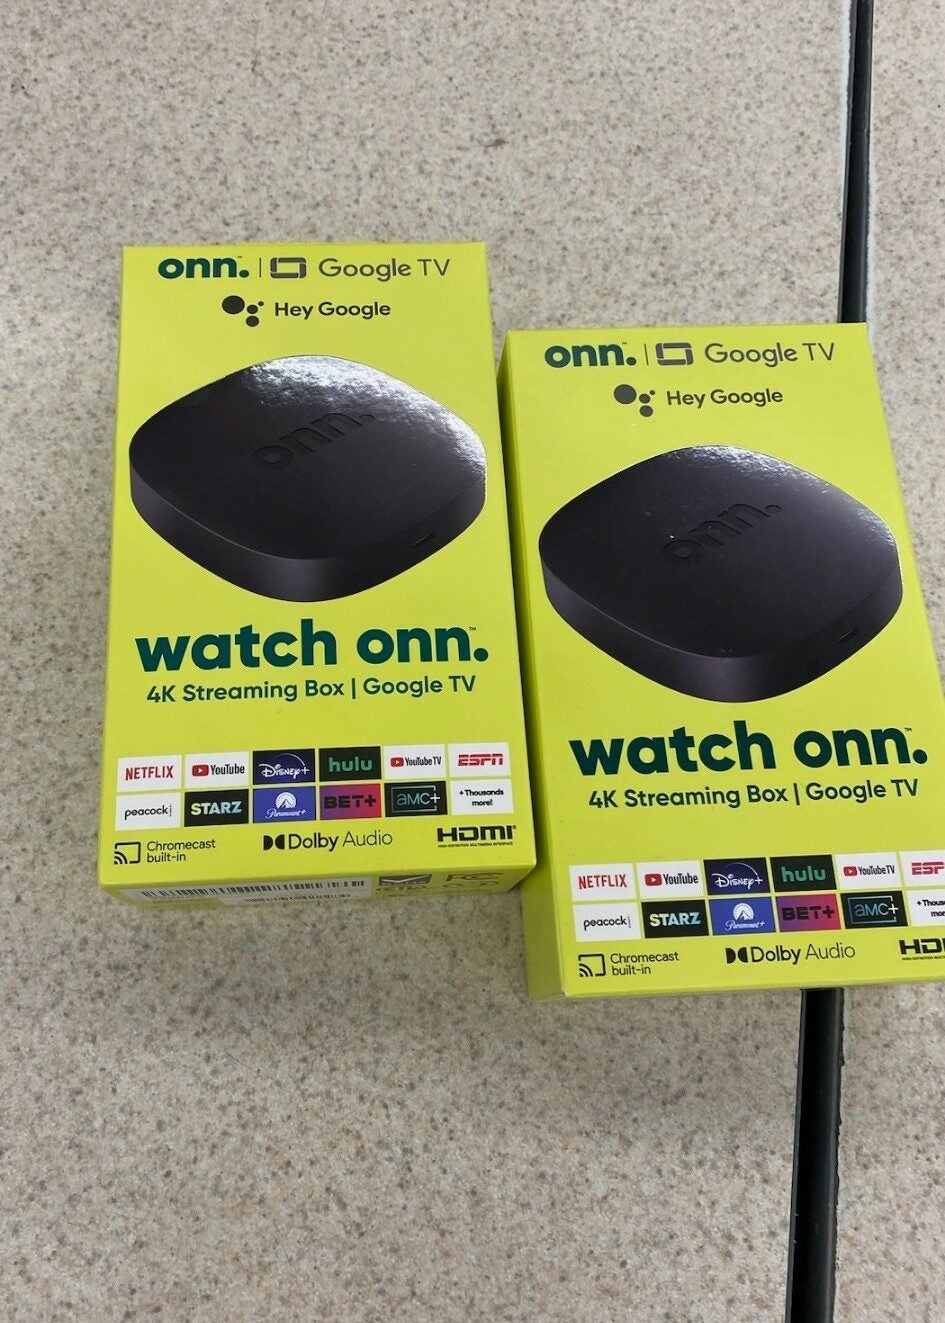 onn 4K Google TV streaming box review: The new best cheap streaming device